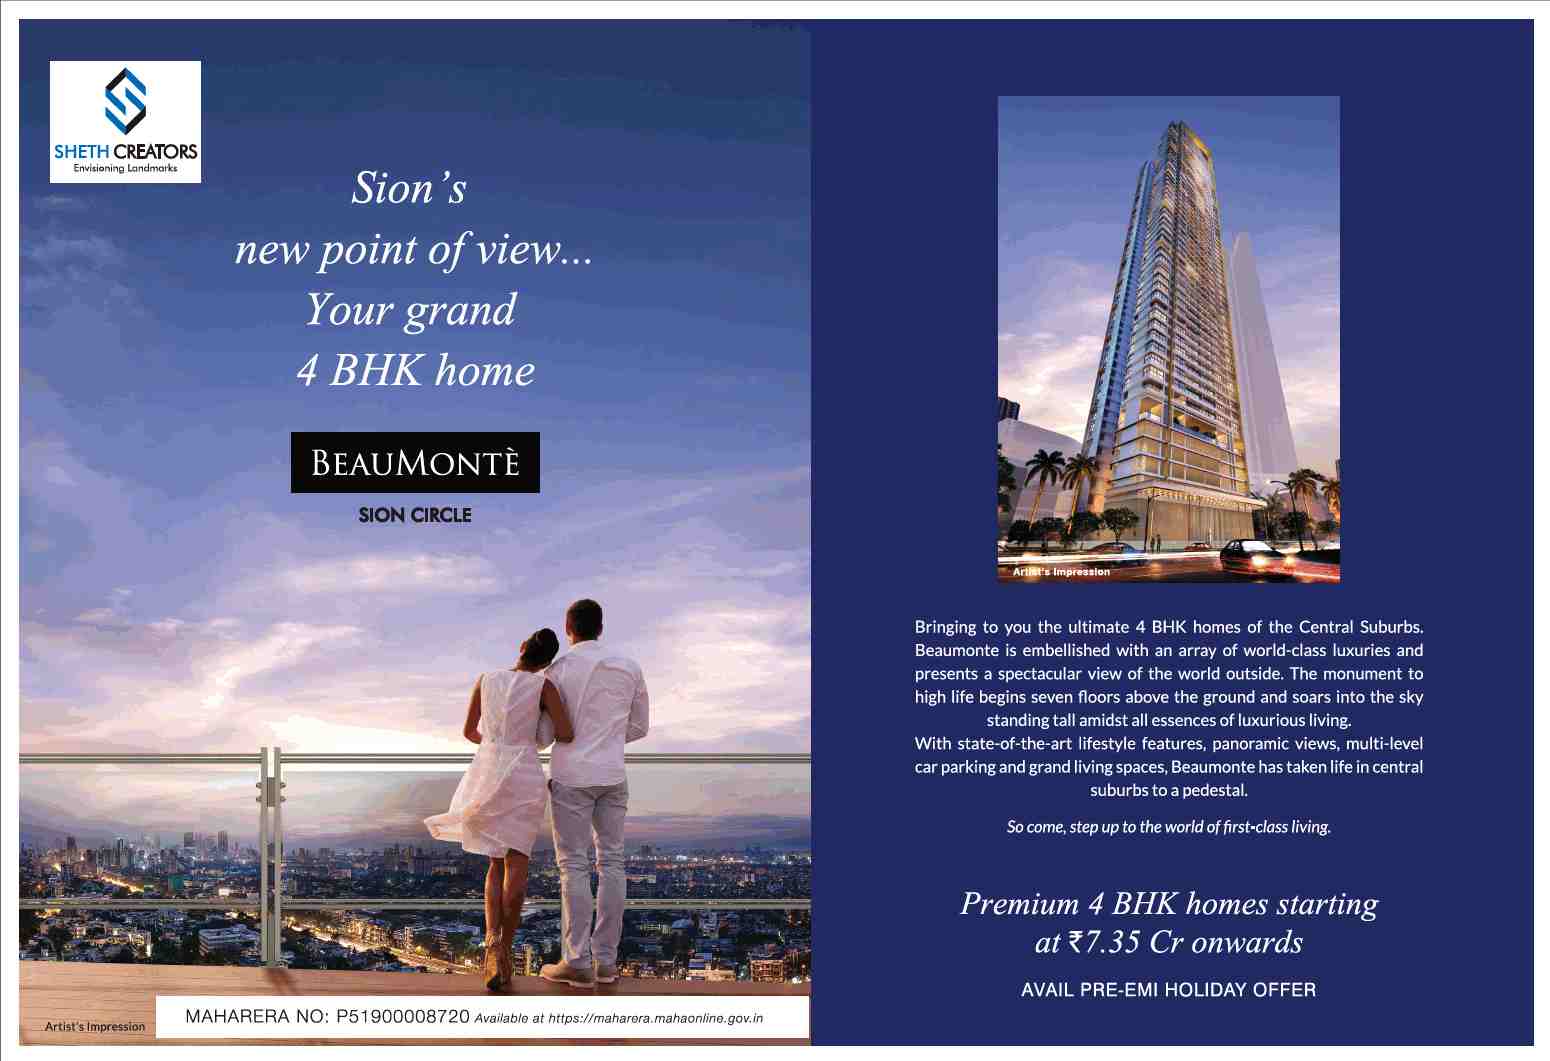 Step up to the world of the first-class living at Sheth Beaumonte in Mumbai